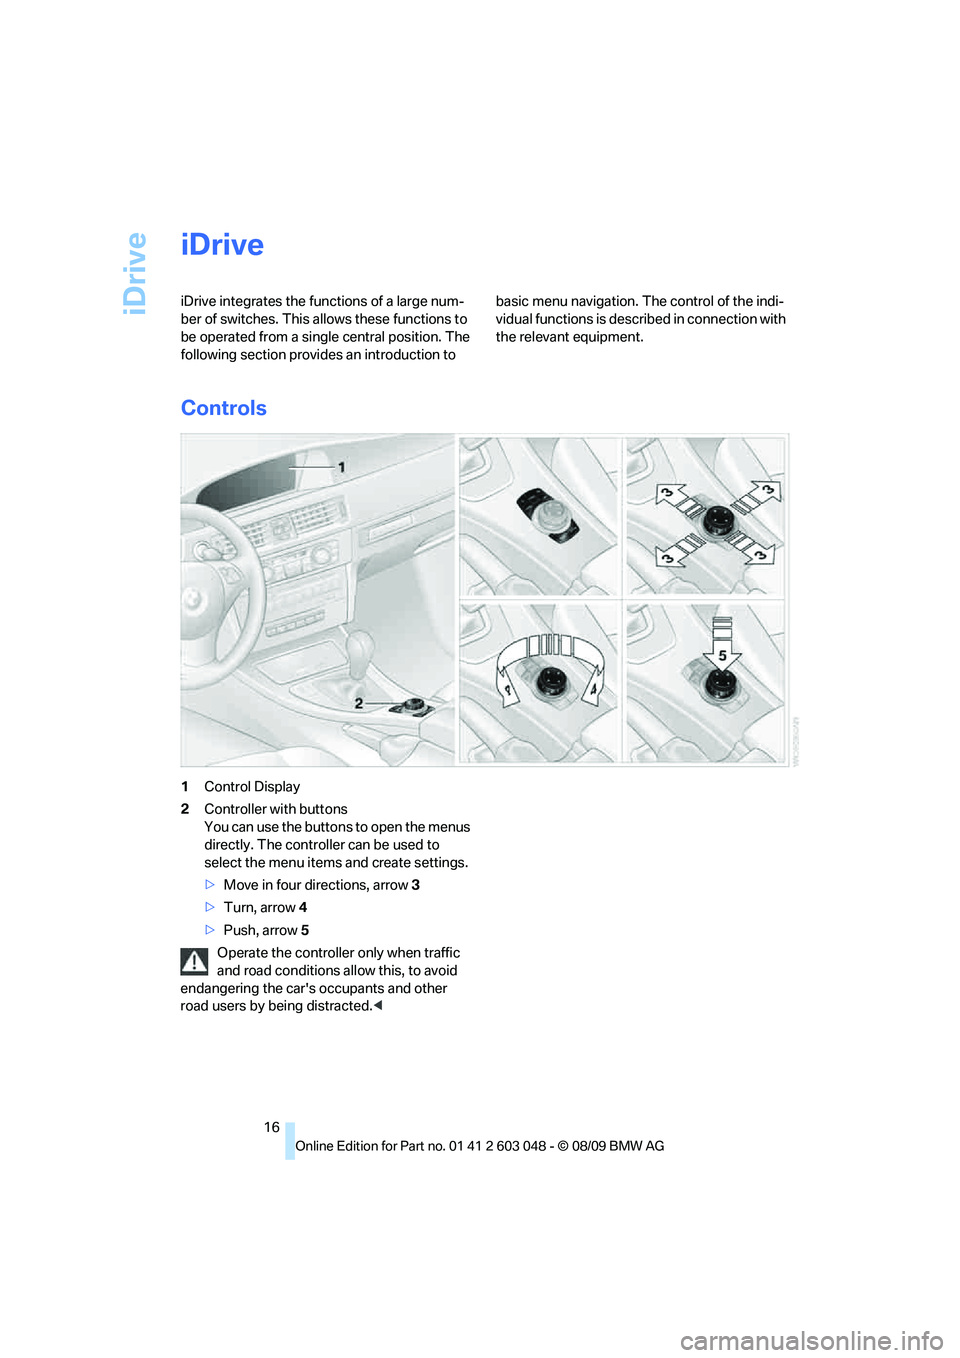 BMW 3 SERIES 2010  Owners Manual iDrive
16
iDrive
iDrive integrates the functions of a large num-
ber of switches. This allows these functions to 
be operated from a single central position. The 
following section provides an introdu